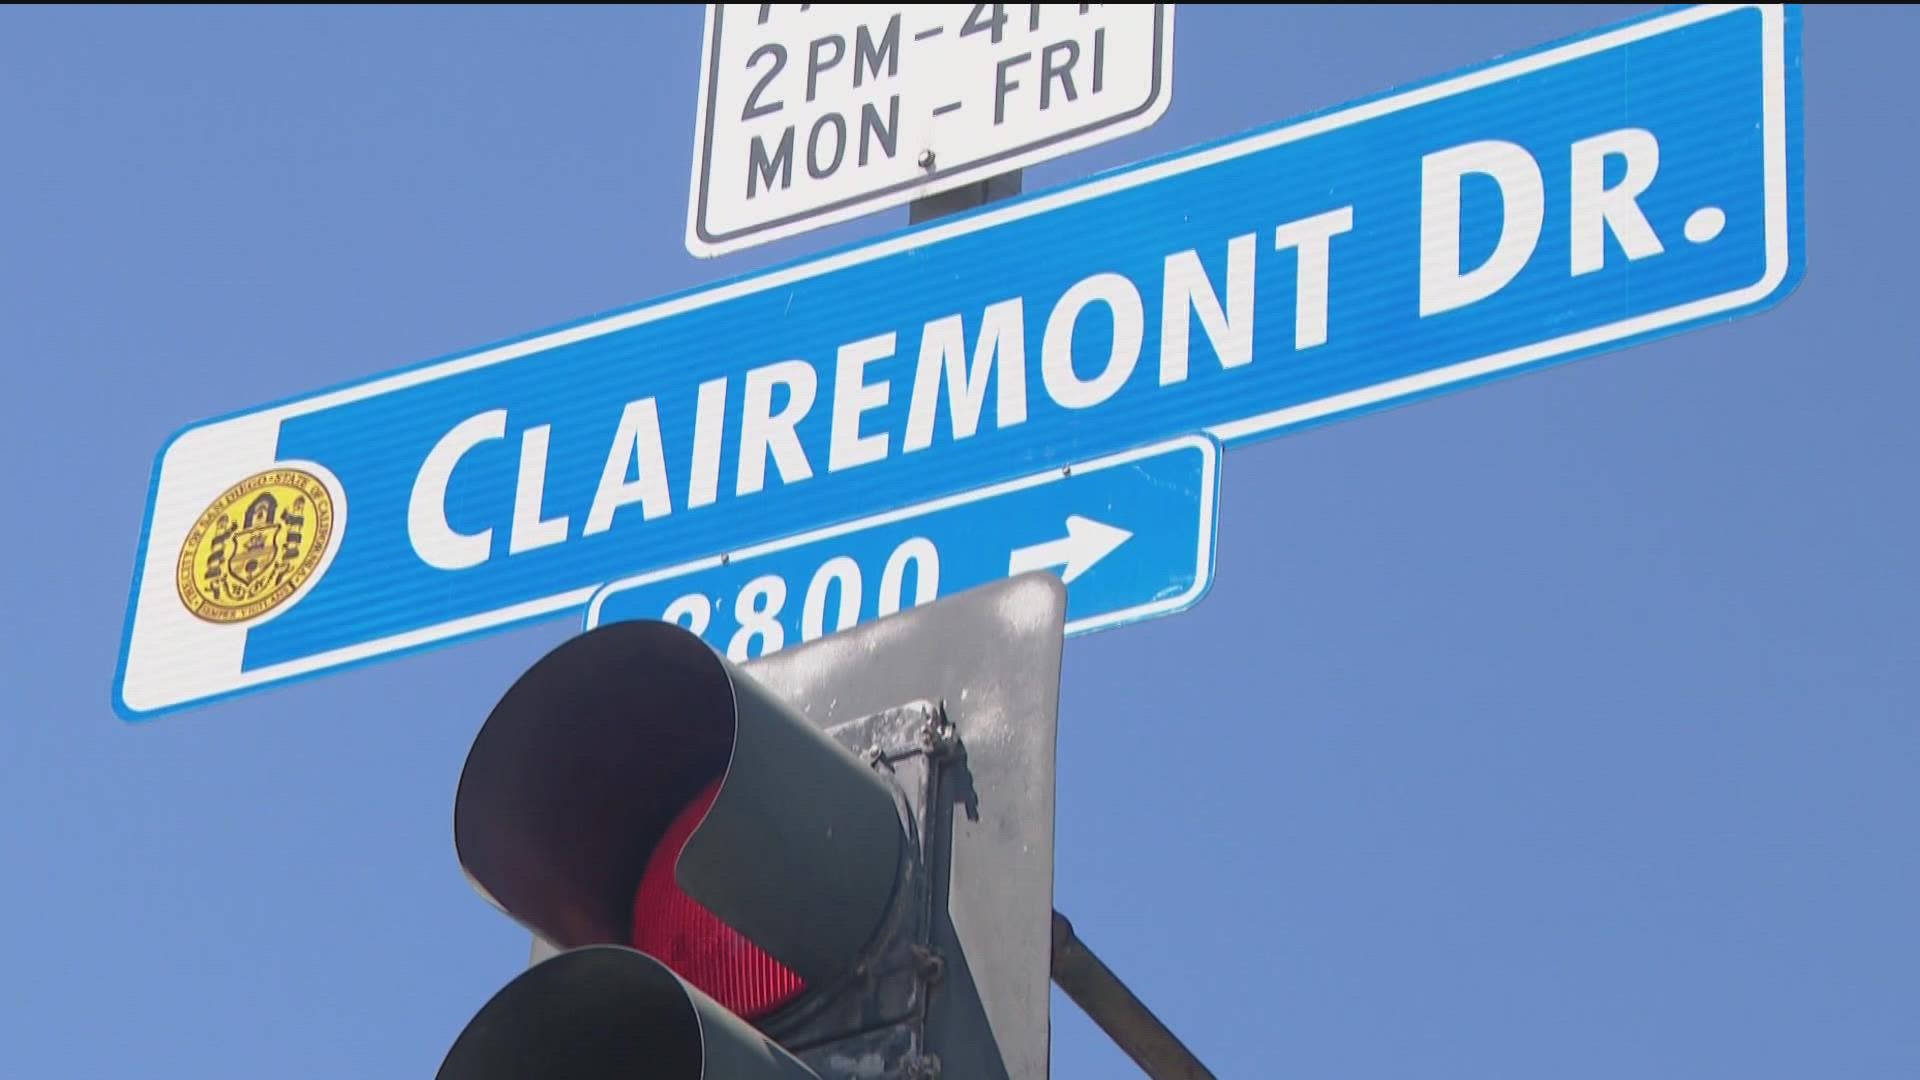 Neighbors say parking issues in Clairemont will get worse